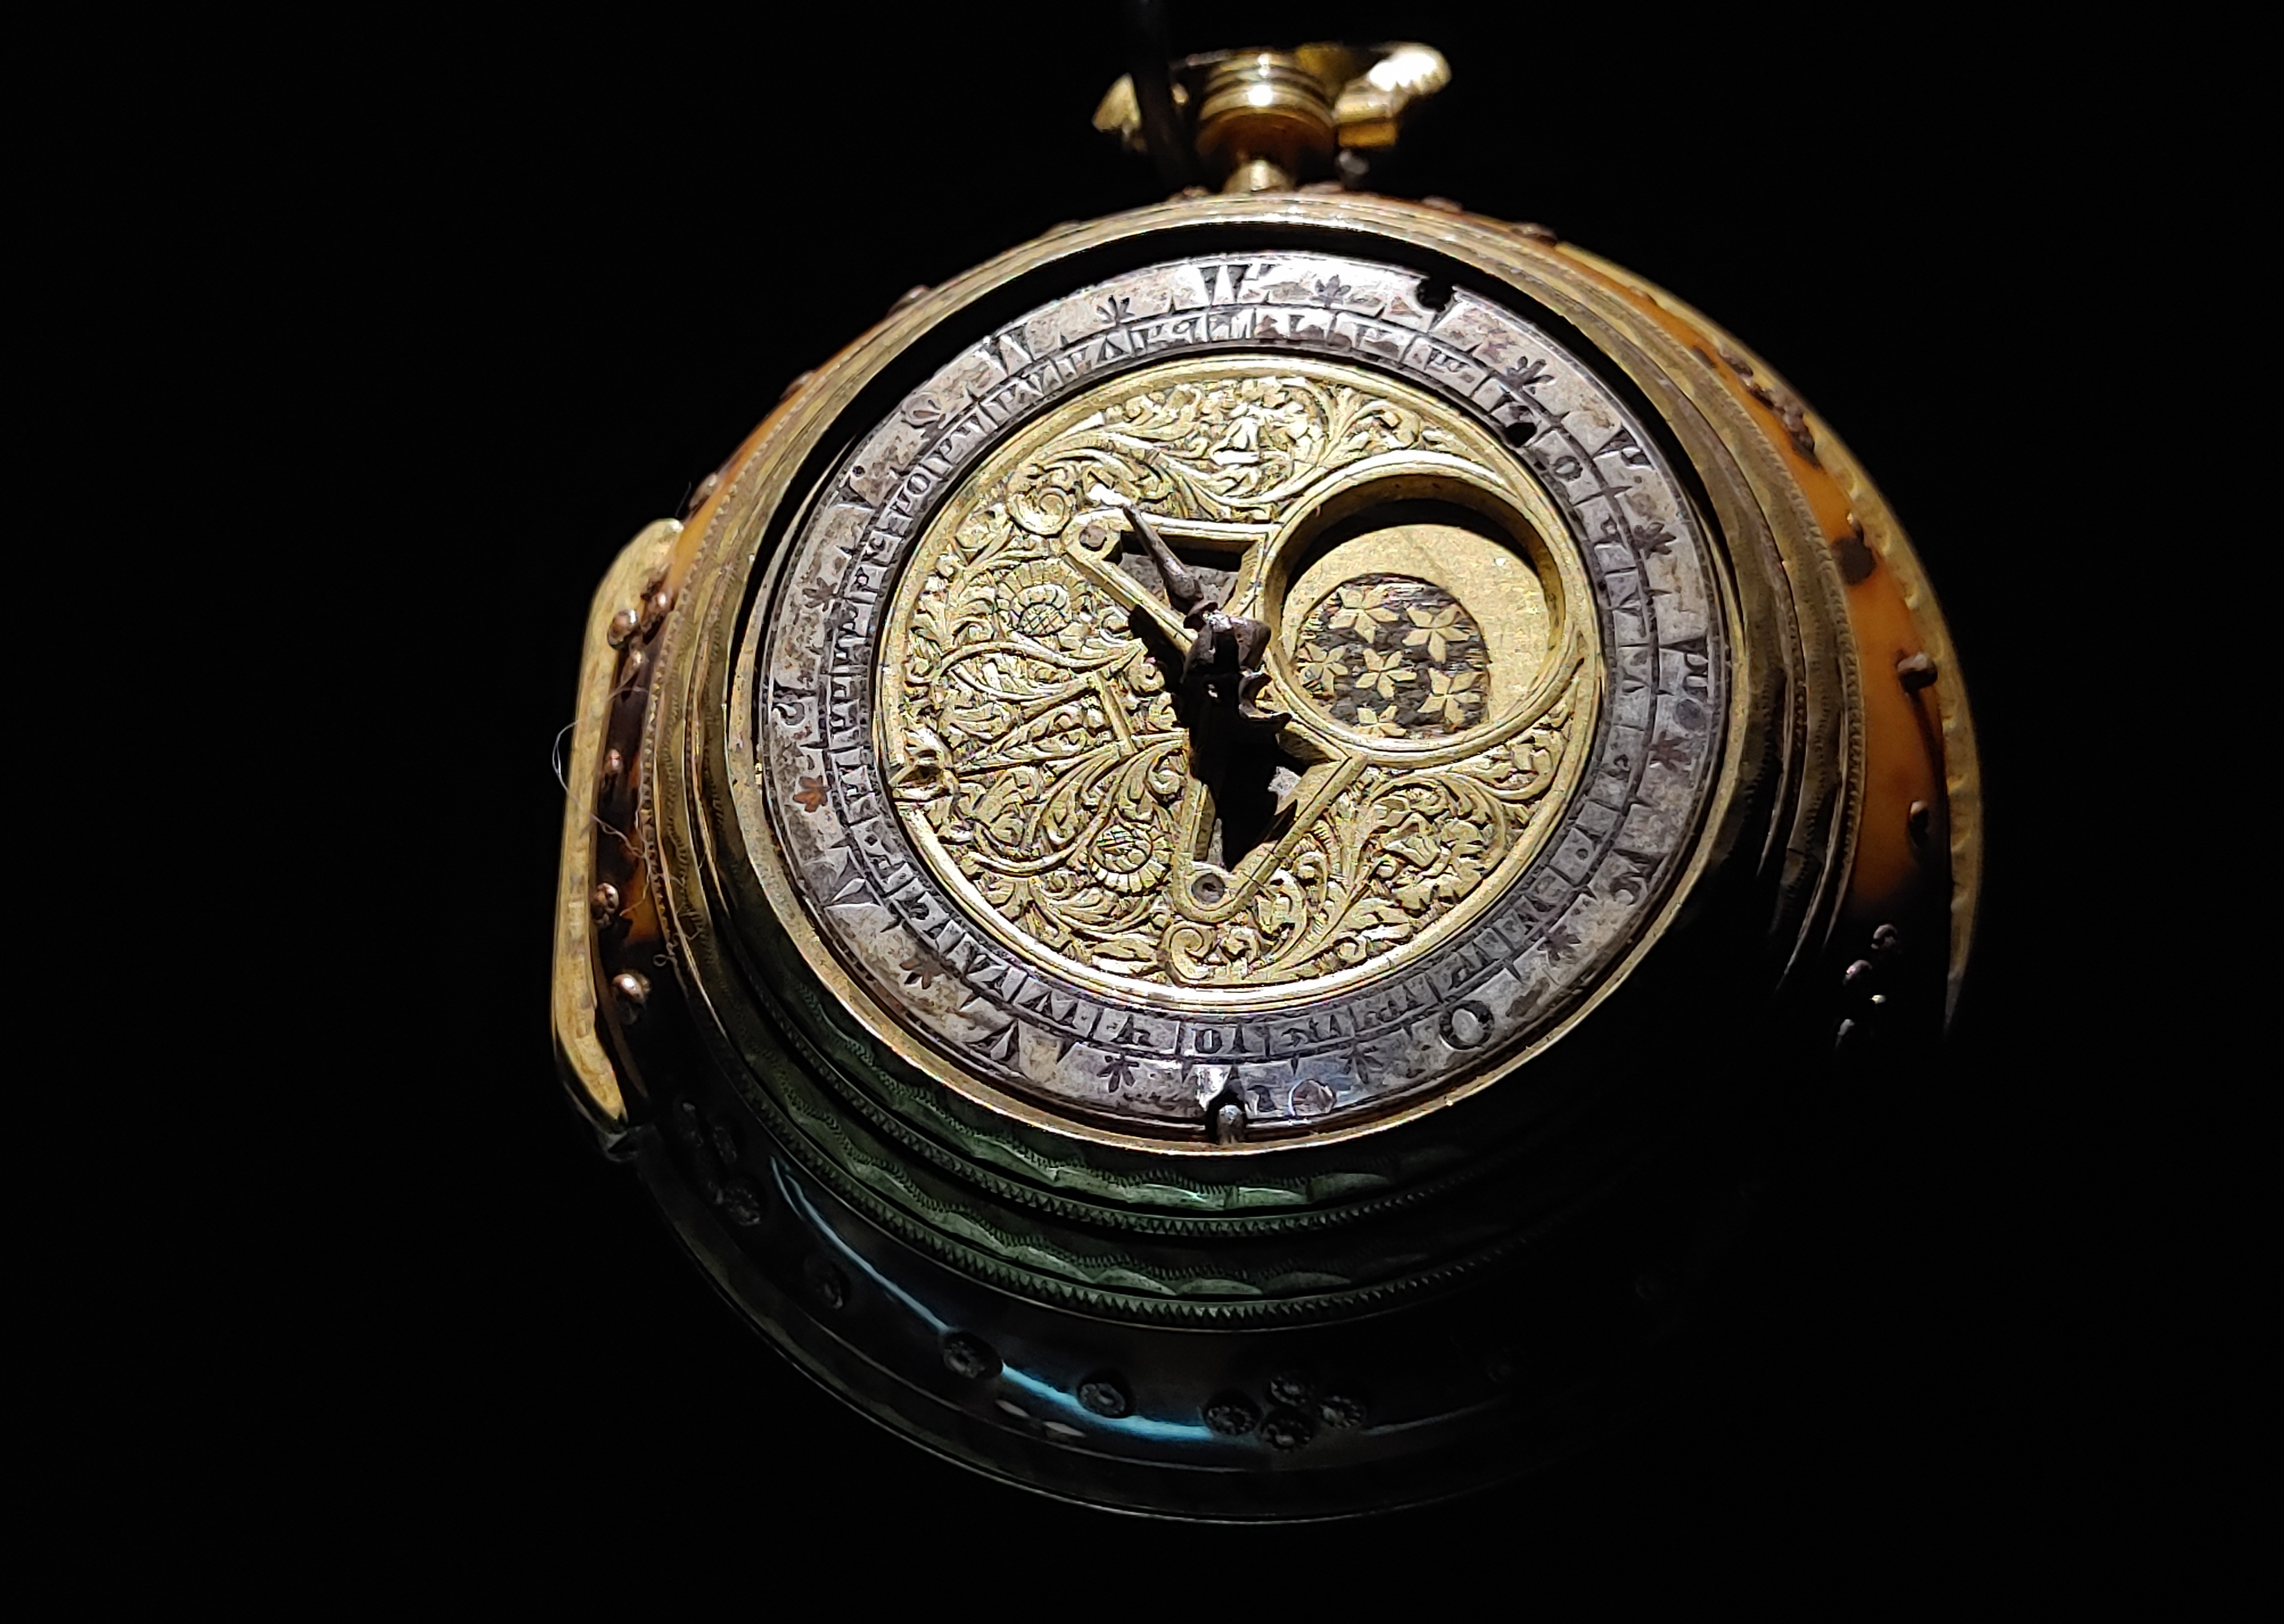 A Turkish calendar watch from the 1600s